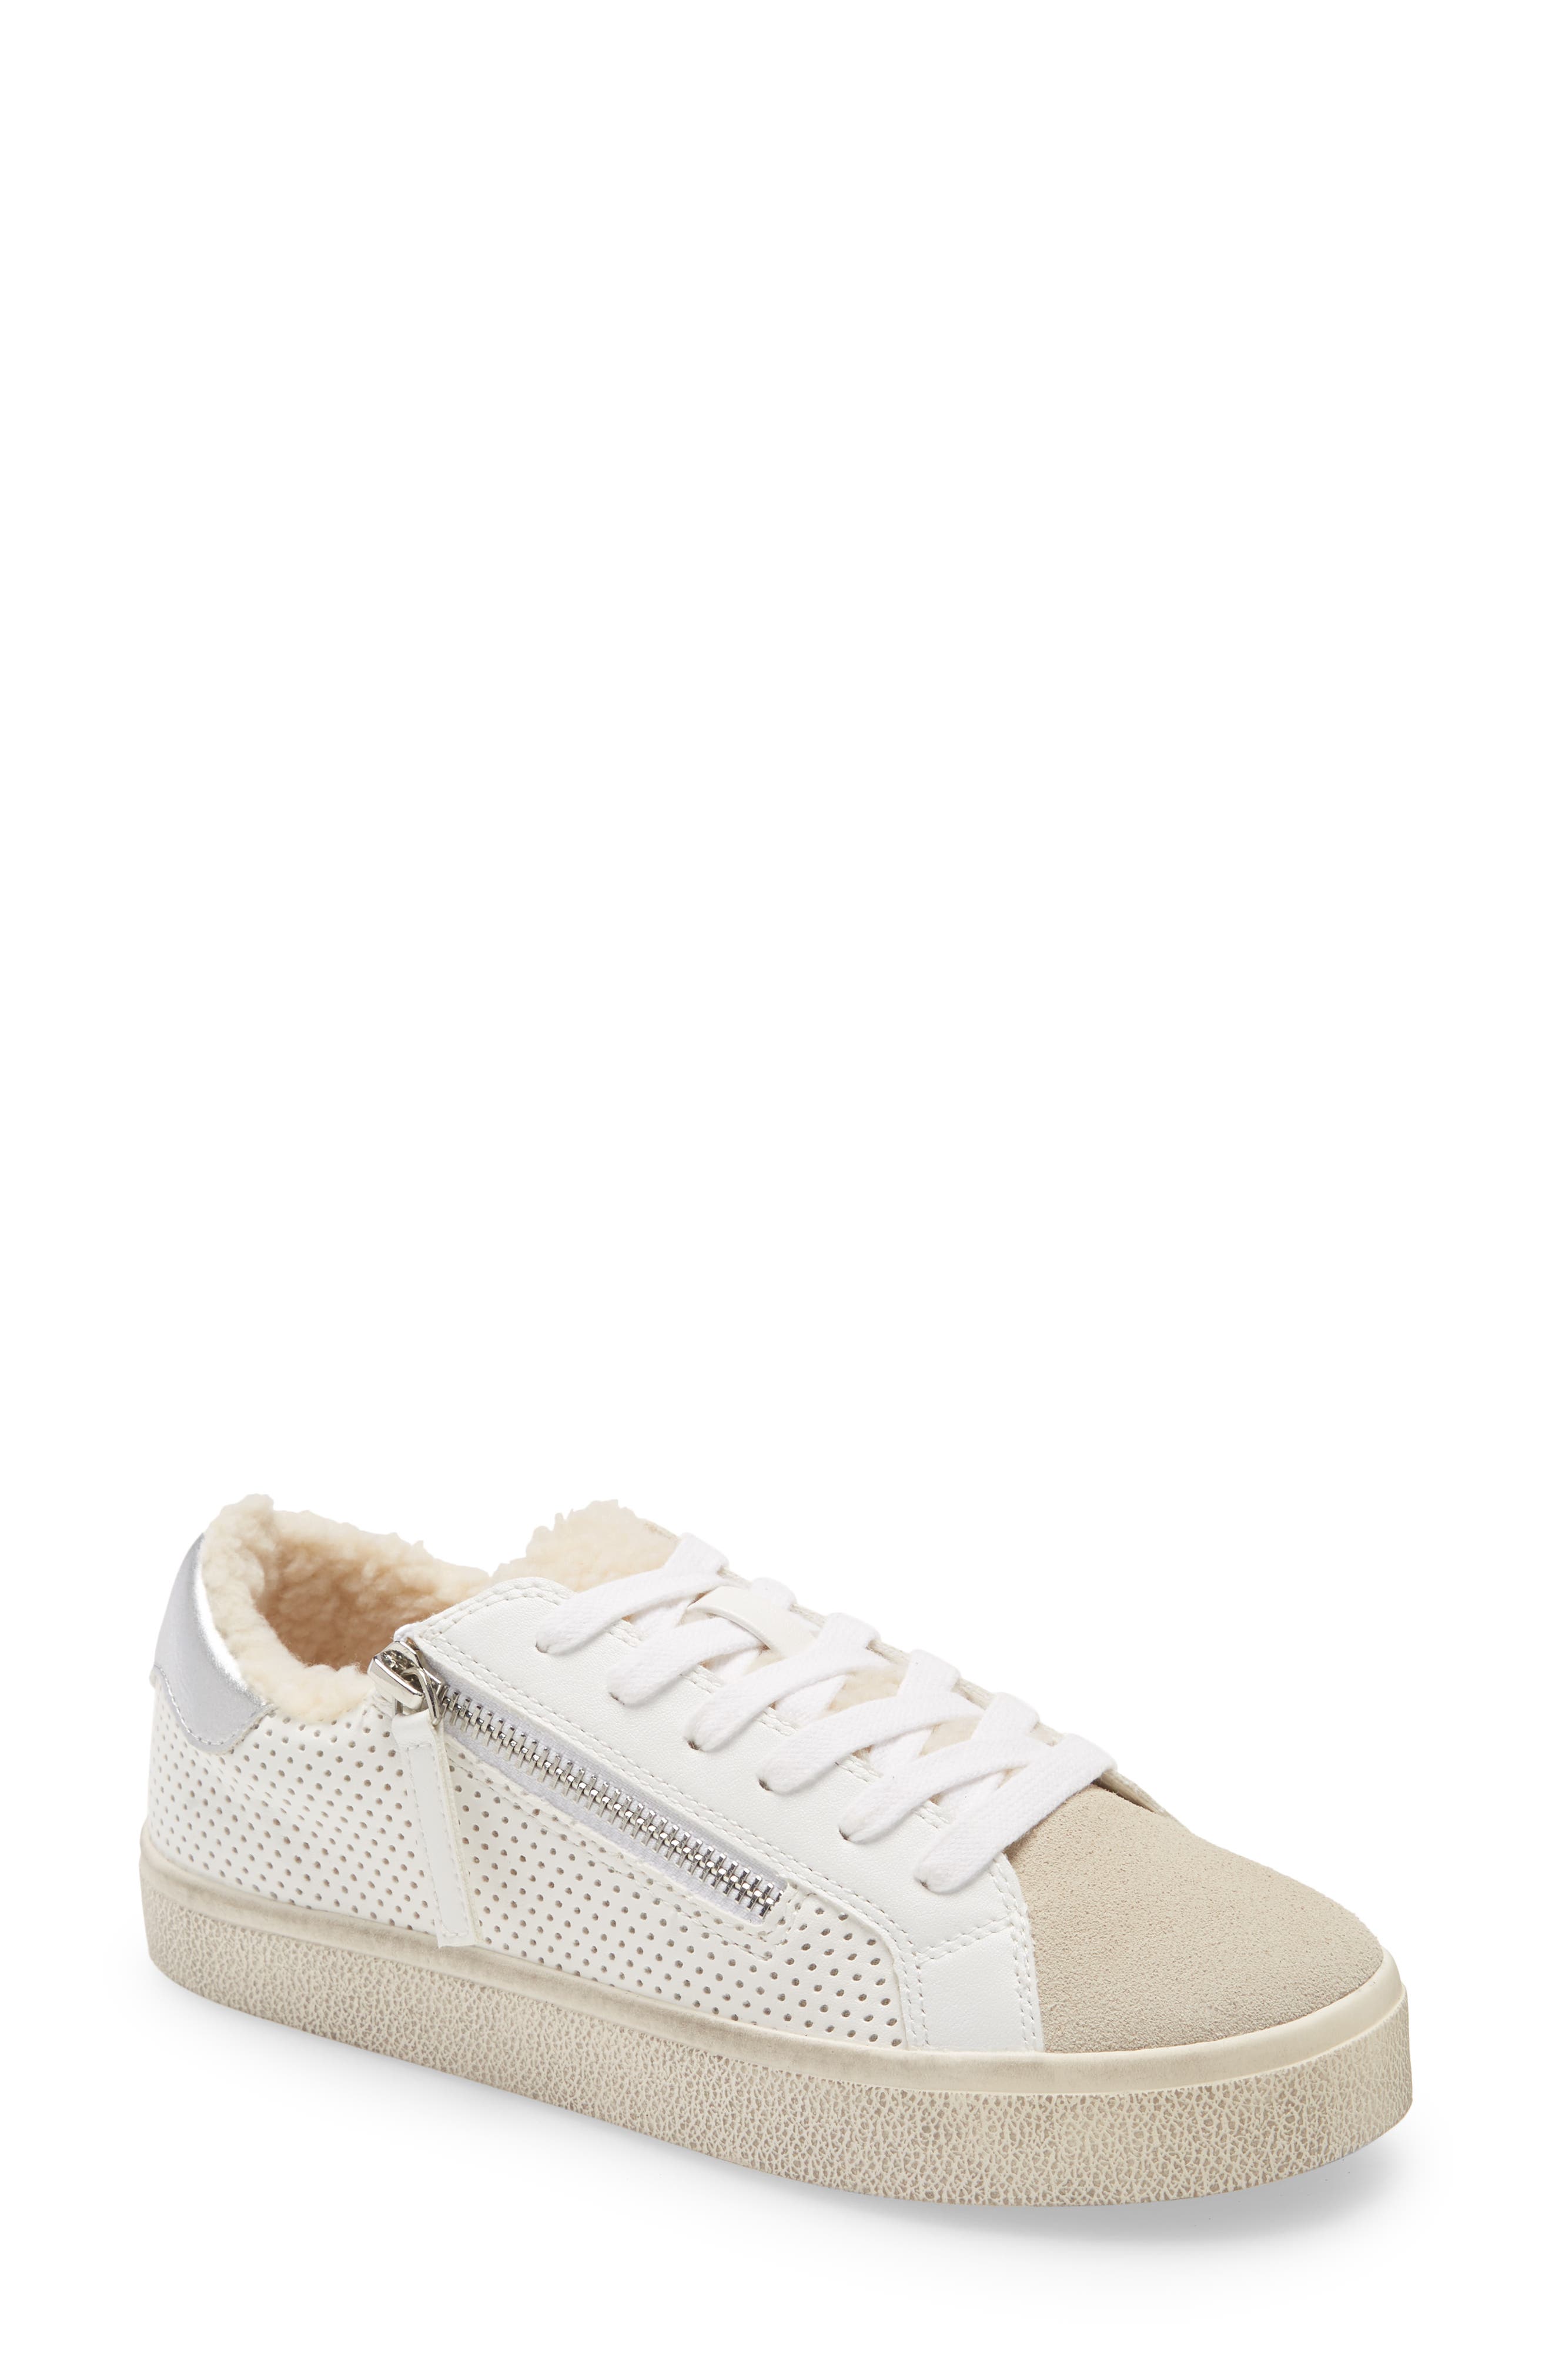 steven by steve madden camela suede and faux fur sherpa lined sneakers